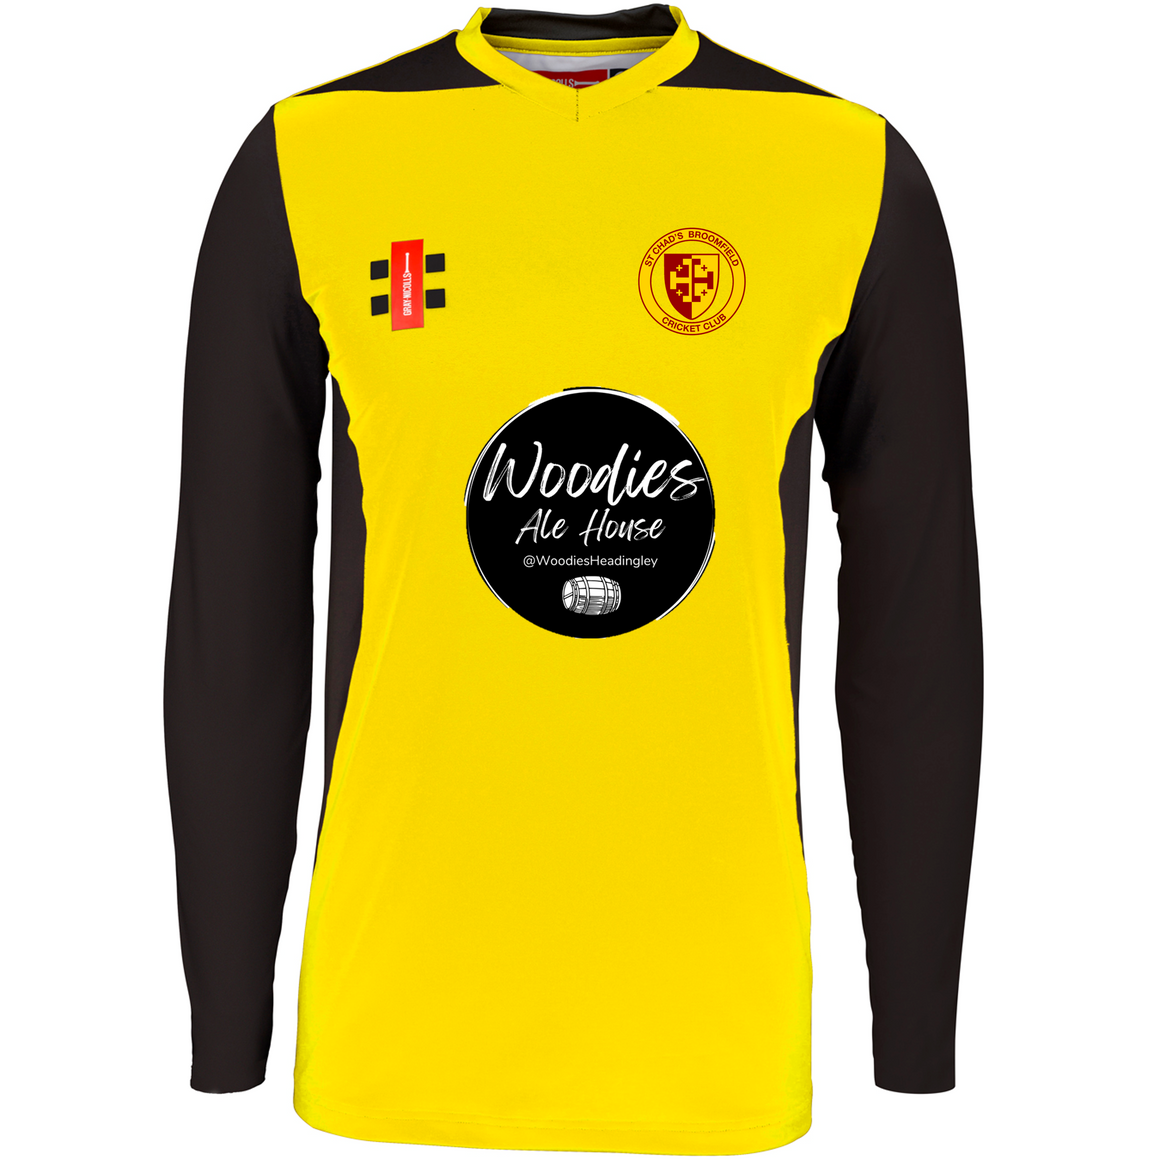 St Chads Mens T20 L/S Shirt (with Name and Number)